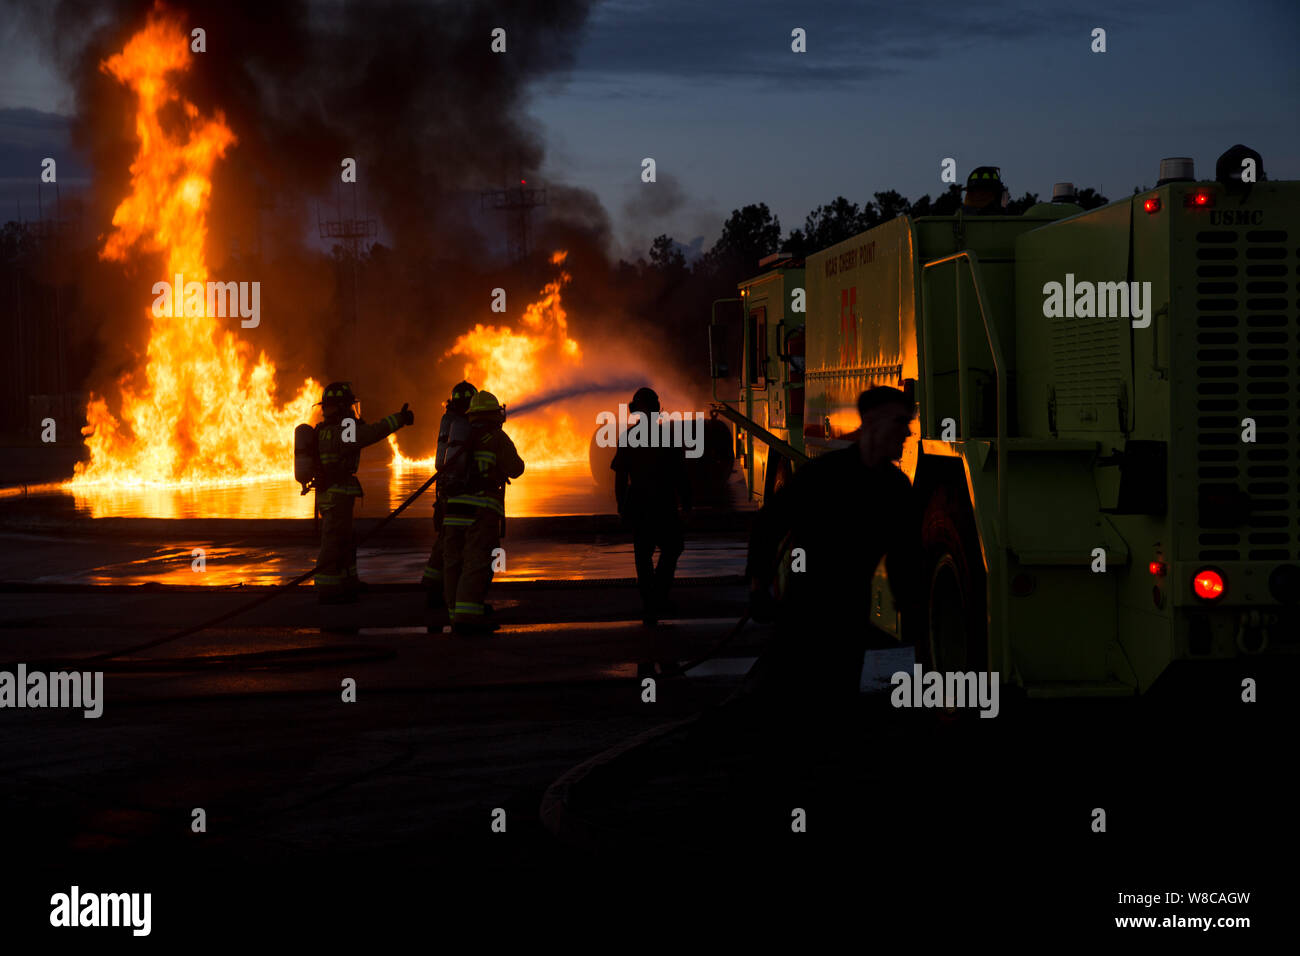 U.S. Marines with Aircraft Rescue and Firefighting (ARFF) assigned to Headquarters and Headquarters Squadron, conduct a controlled fuel burn drill at Marine Corps Air Station Cherry Point, North Carolina, July 31, 2019. The training exercise replicated the kind of fires they may encounter in the line of duty and helped familiarize the Marines with the vehicles, gear, and rescue equipment needed to safely and efficiently extinguish fuel fires. The ARFF Marines used hand-line attacks as well as P-19 fire trucks to contain the flames. (U.S. Marine Corps photo by Lance Cpl. Michael Neuenhoff). Stock Photo